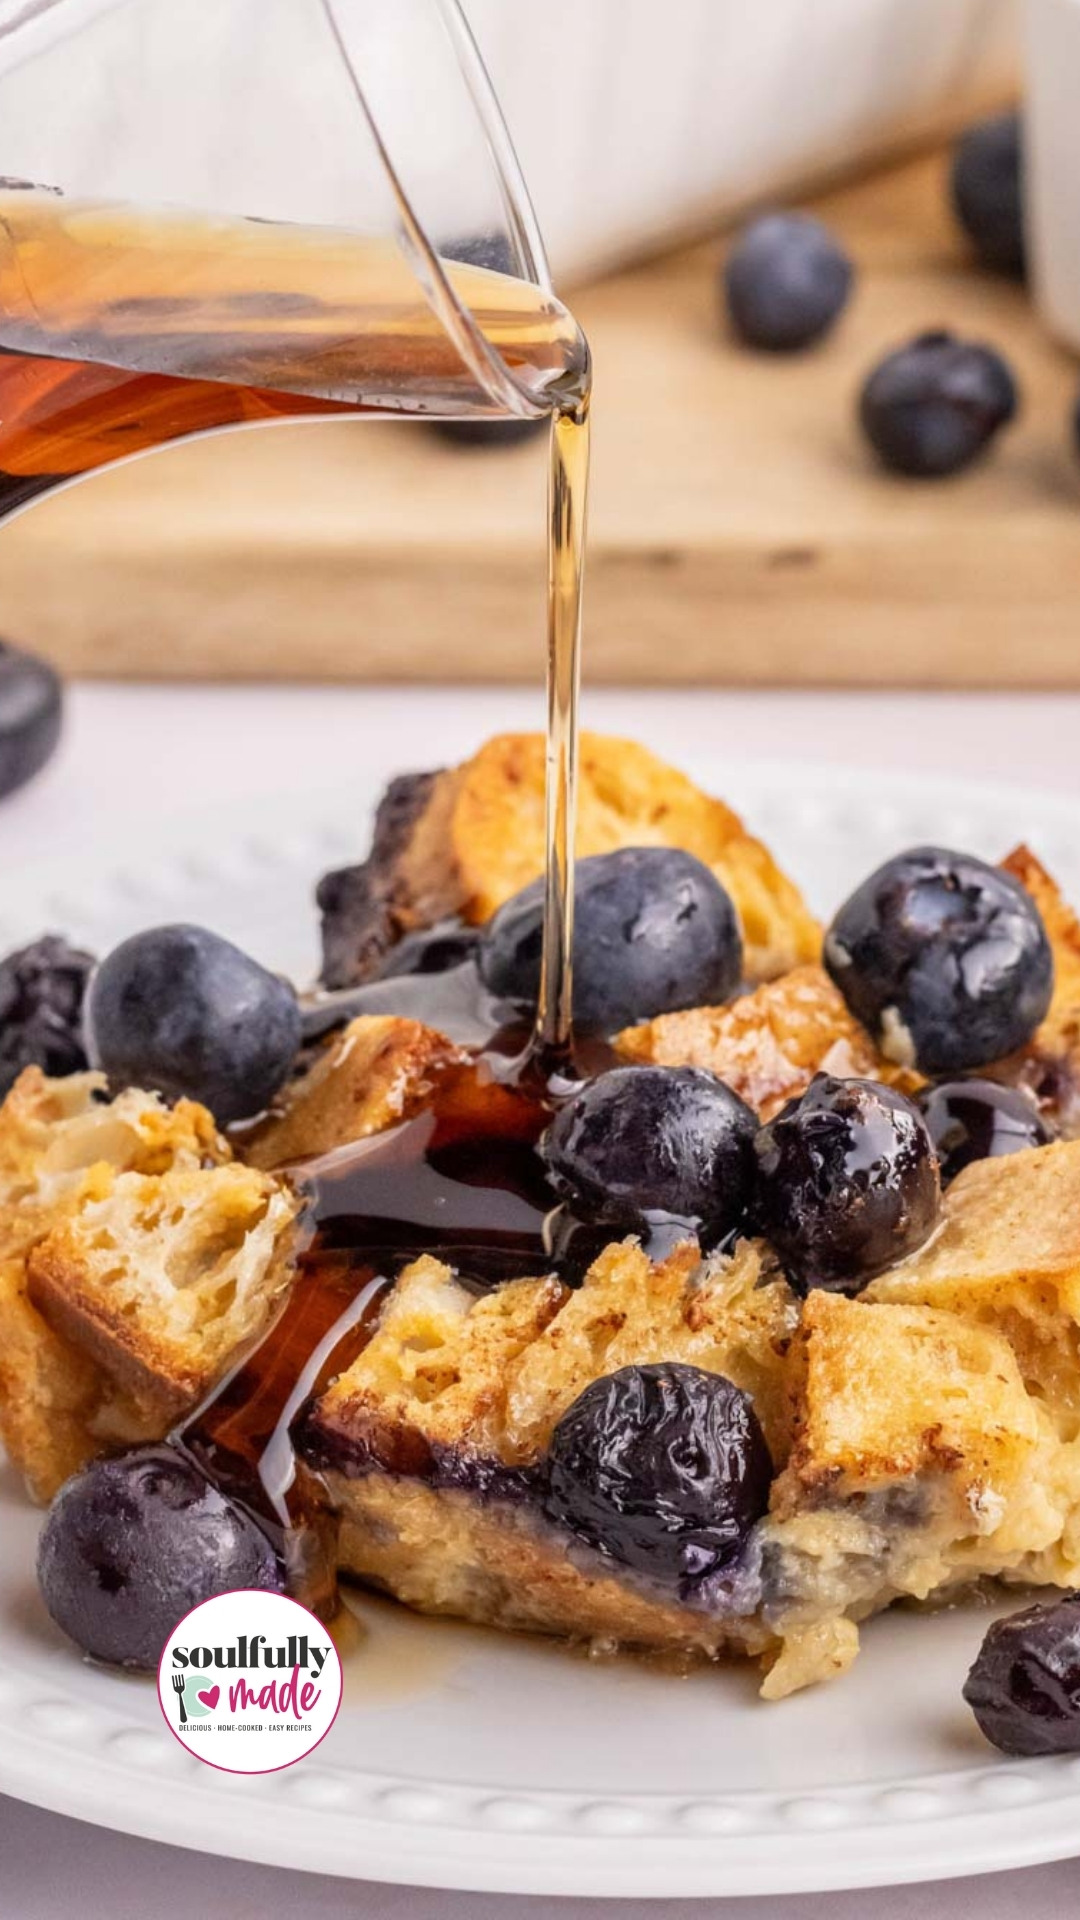 A Pinterest image of syrup being poured over a plate of blueberry french toast casserole.